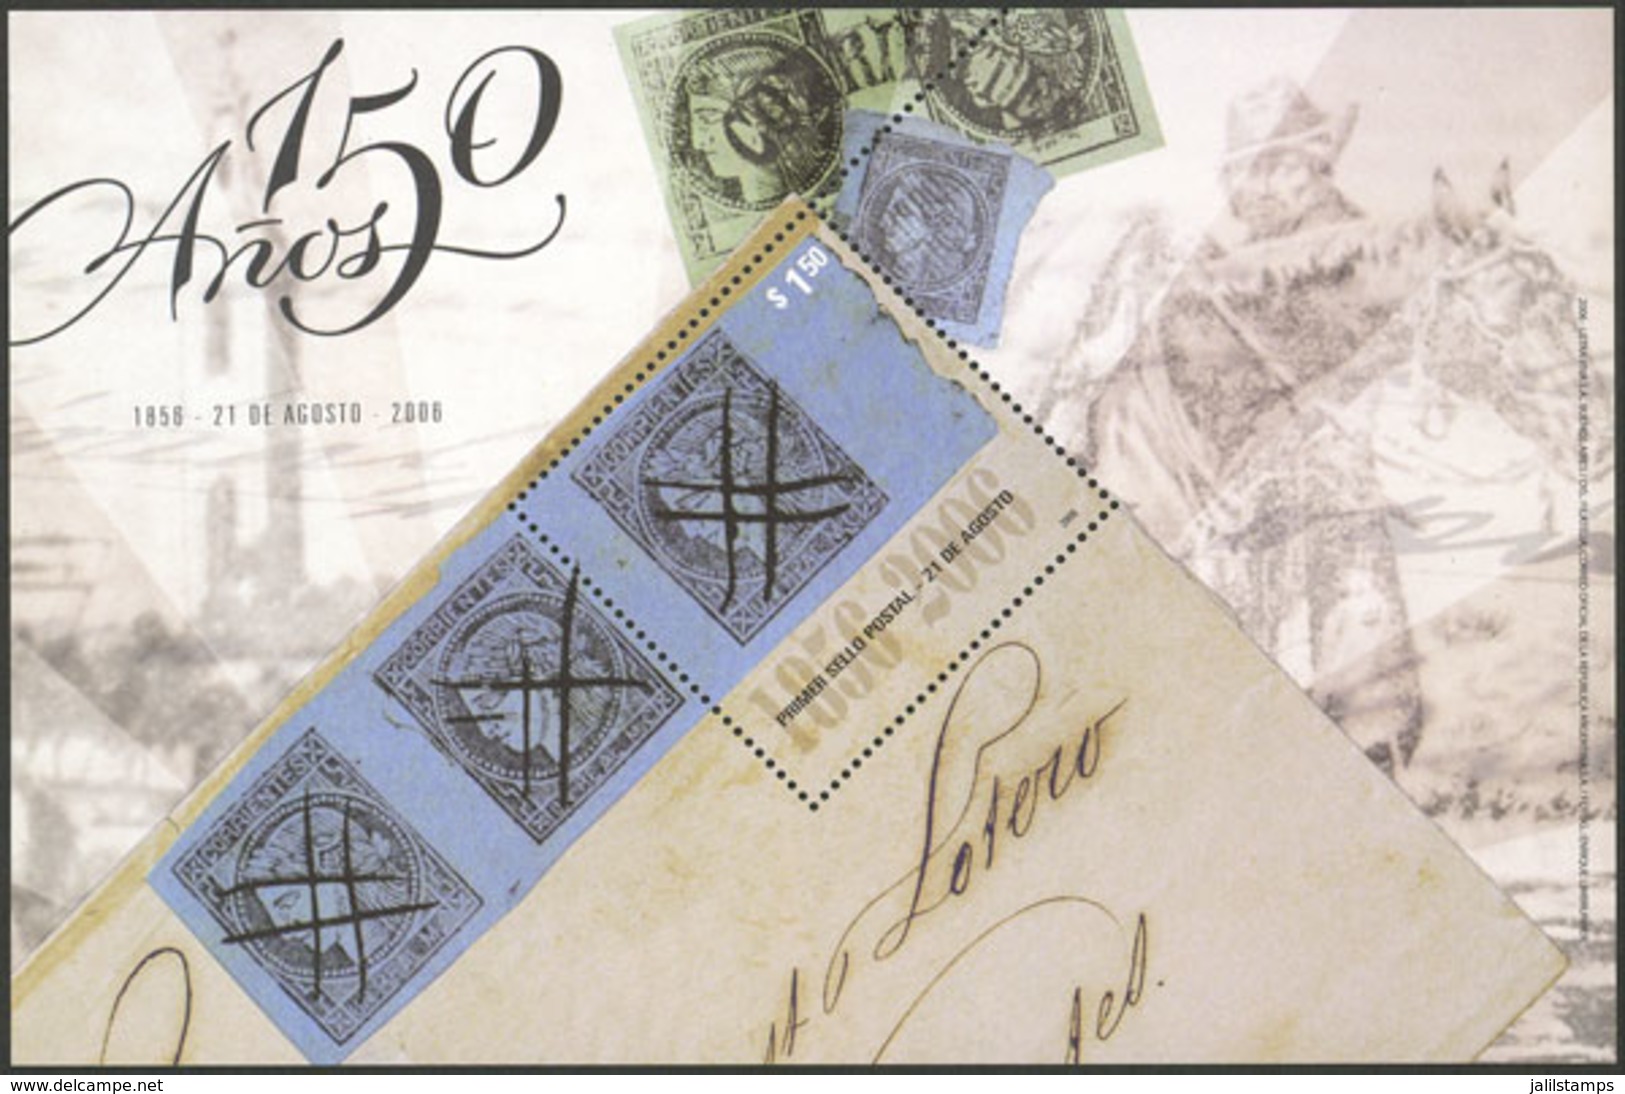 ARGENTINA: GJ.HB 175a, 2006 Corrientes Stamp 150th Anniversary, S.sheet With SILVER COLOR OMITTED Variety (without REPUB - Blokken & Velletjes